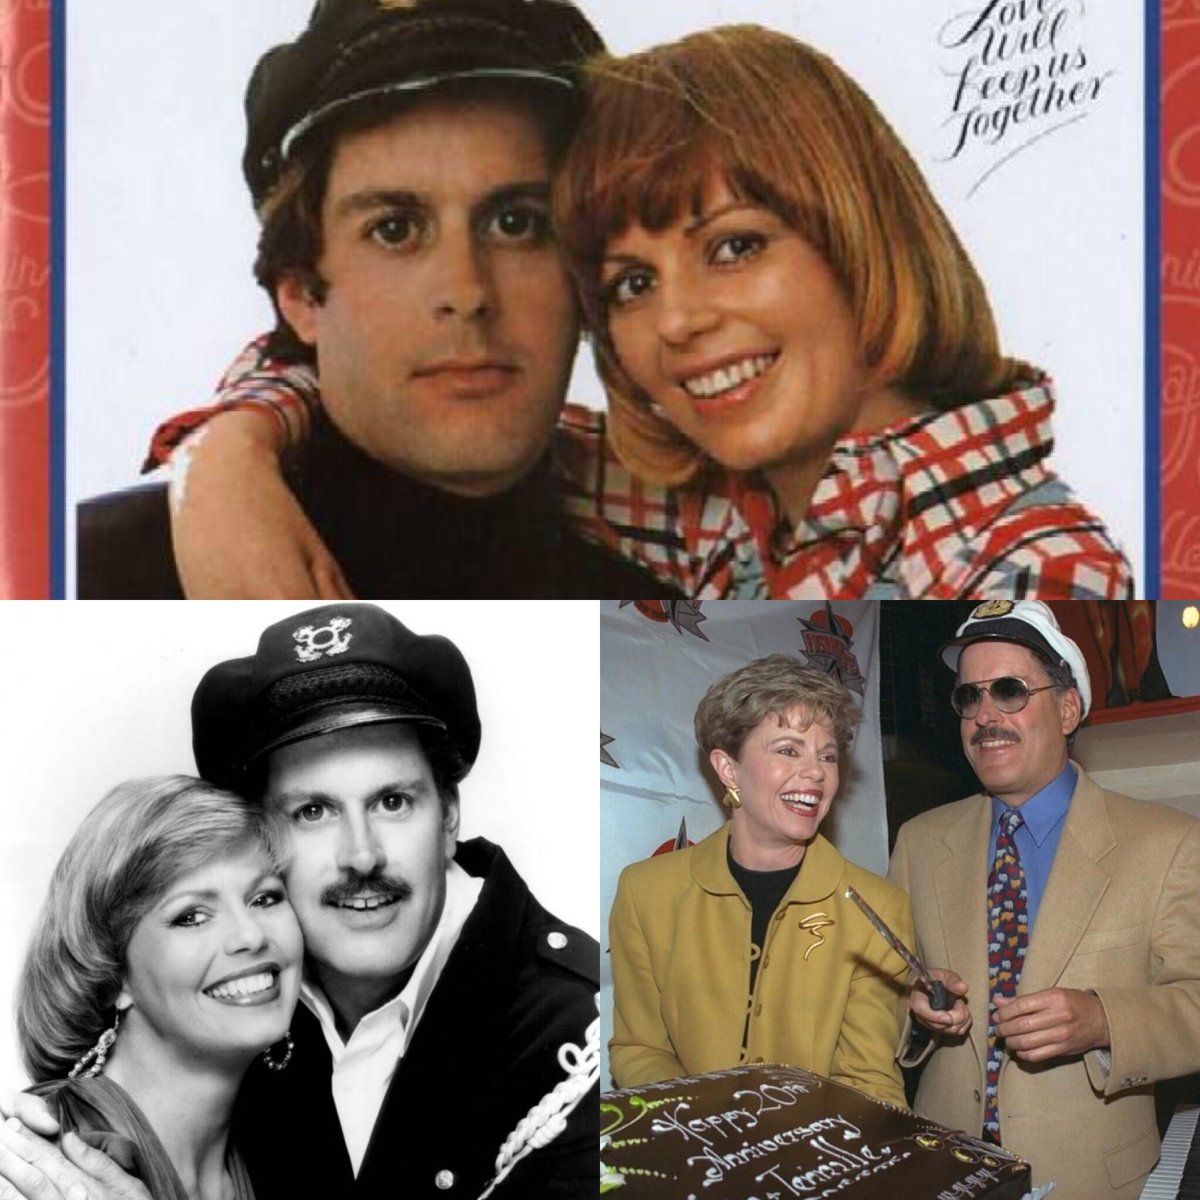 #RipDarylDragon
Captain And Tennillie's Daryl Dragon dies of renal failure aged 76 with ex-wife Toni Tennille at his side.
#CaptainAndTennille